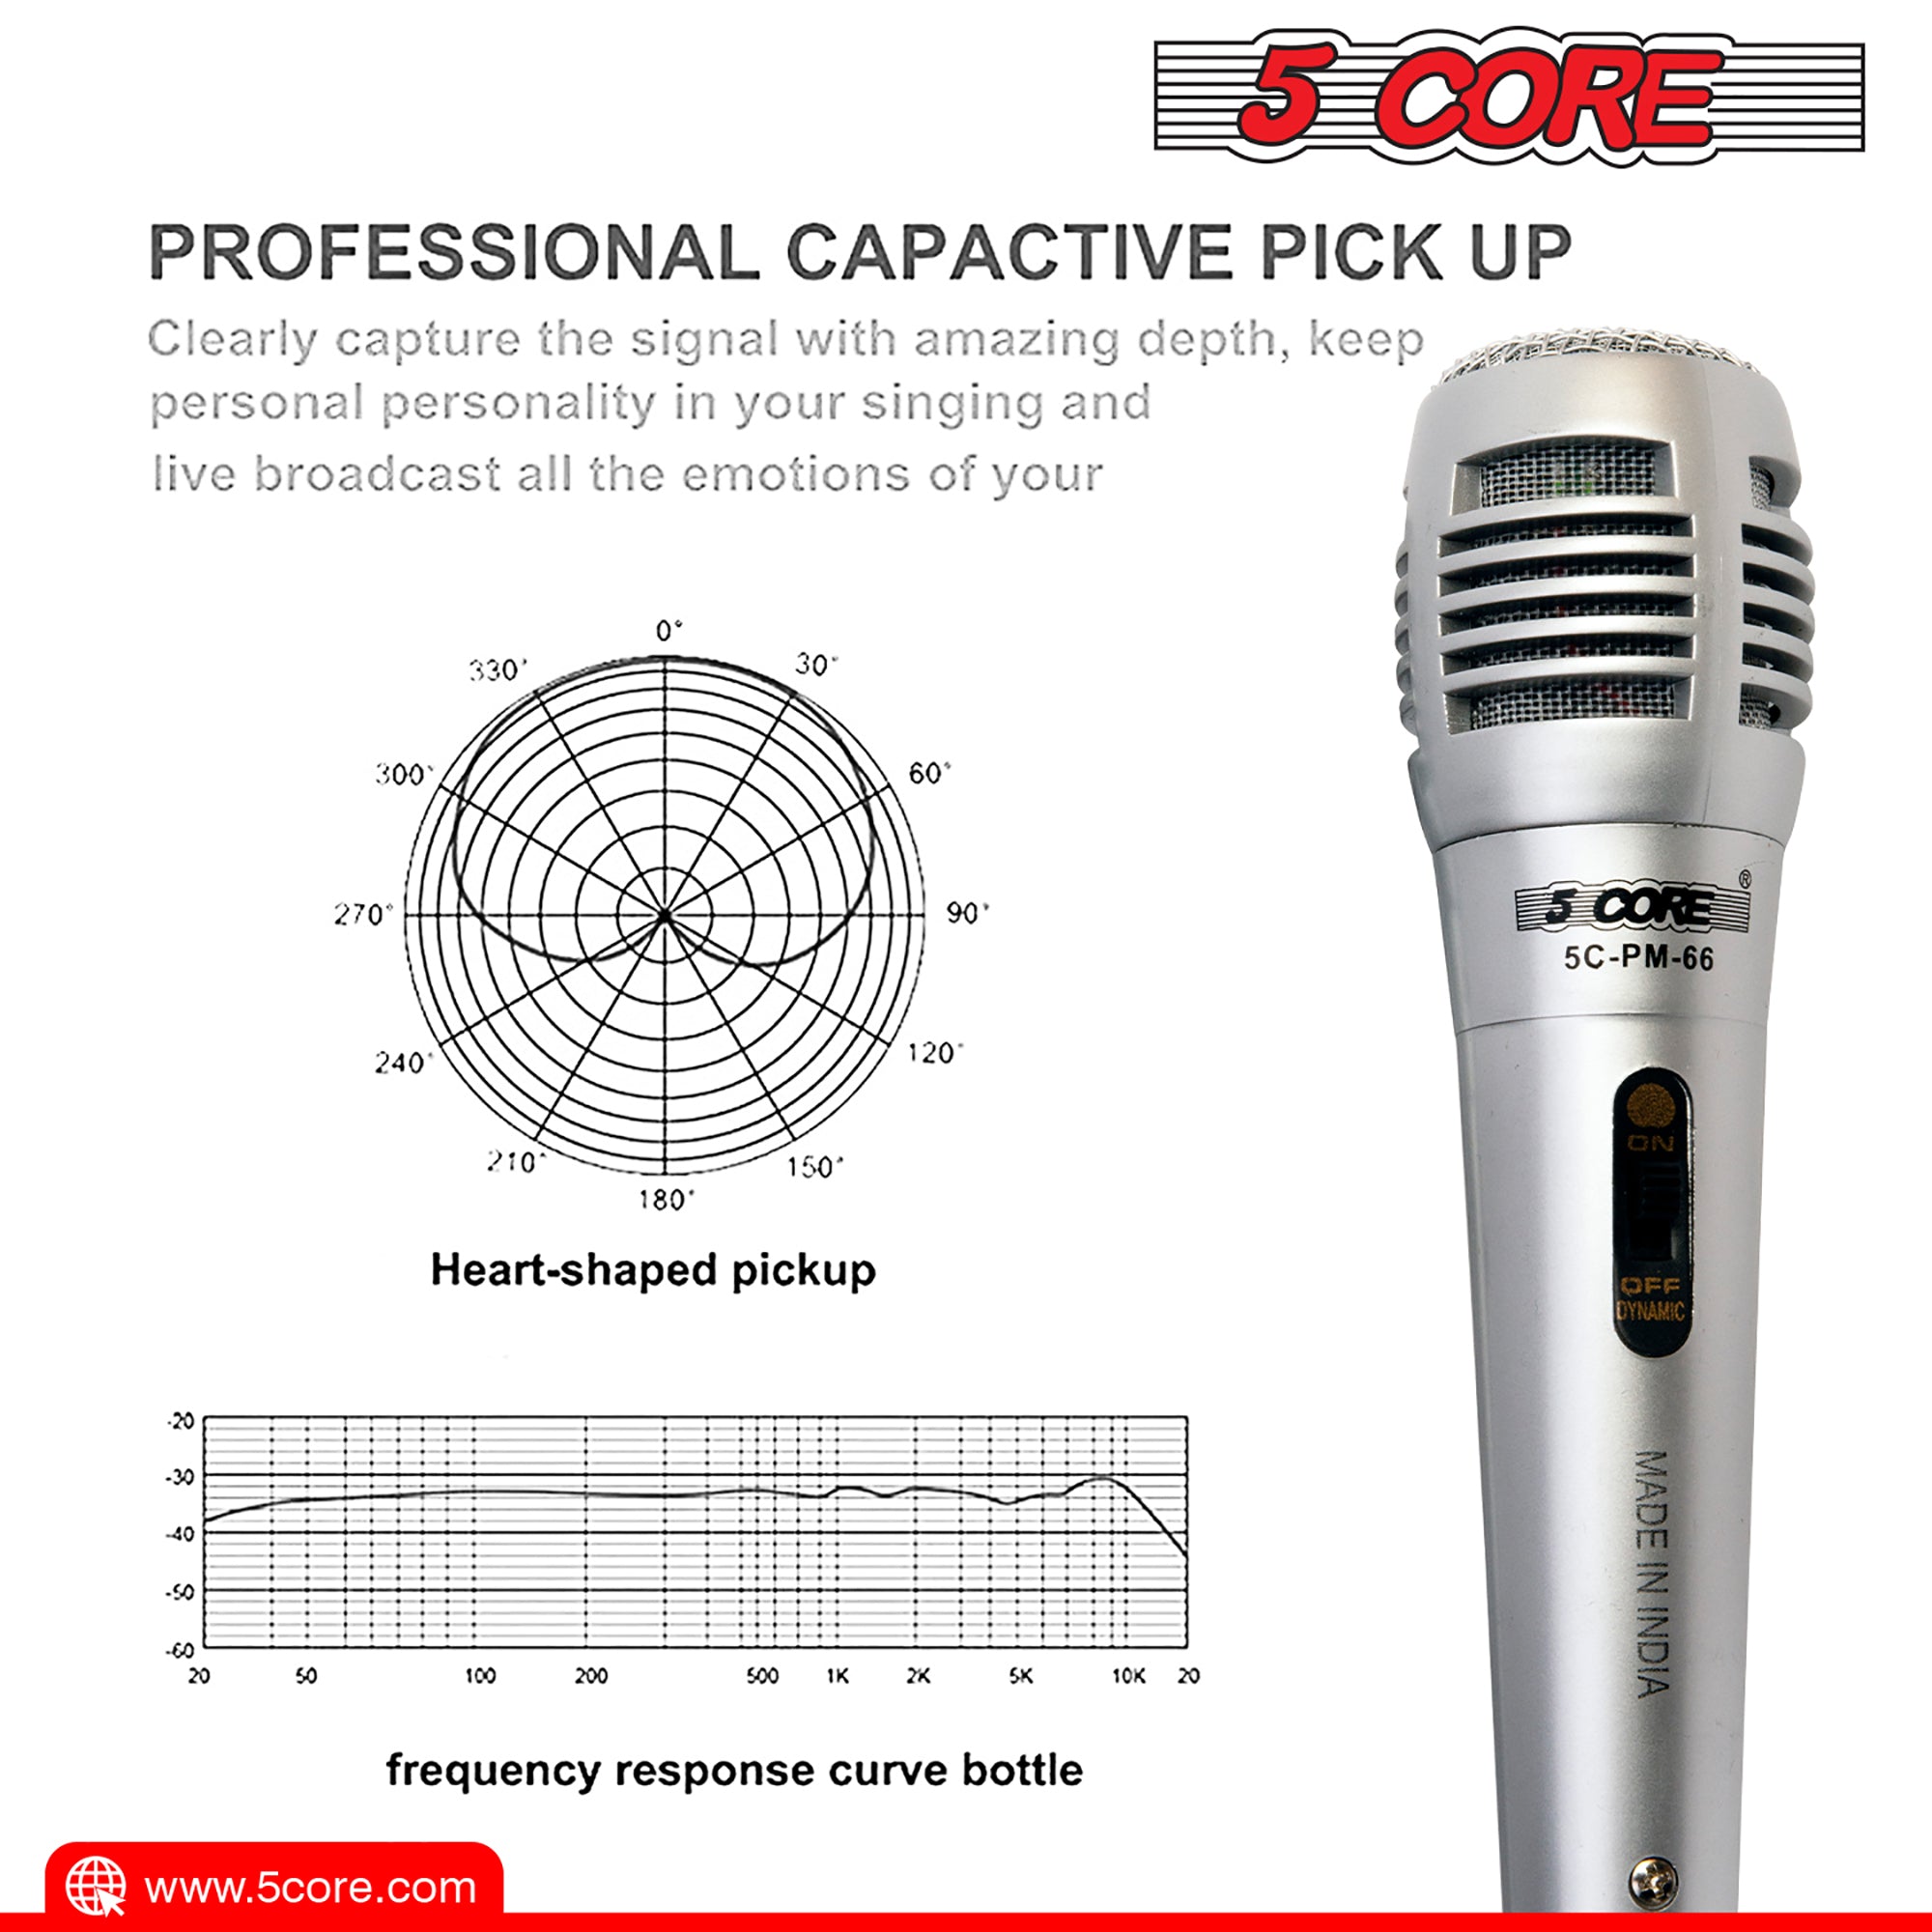 5 CORE 4 Pack Vocal Dynamic Cardioid Handheld Microphone Unidirectional Mic with 2 X 5ft Detachable XLR Cable to ¼ inch Audio Jack and On/Off Switch for Karaoke Singing (Silver) - PM-66k 2 pair